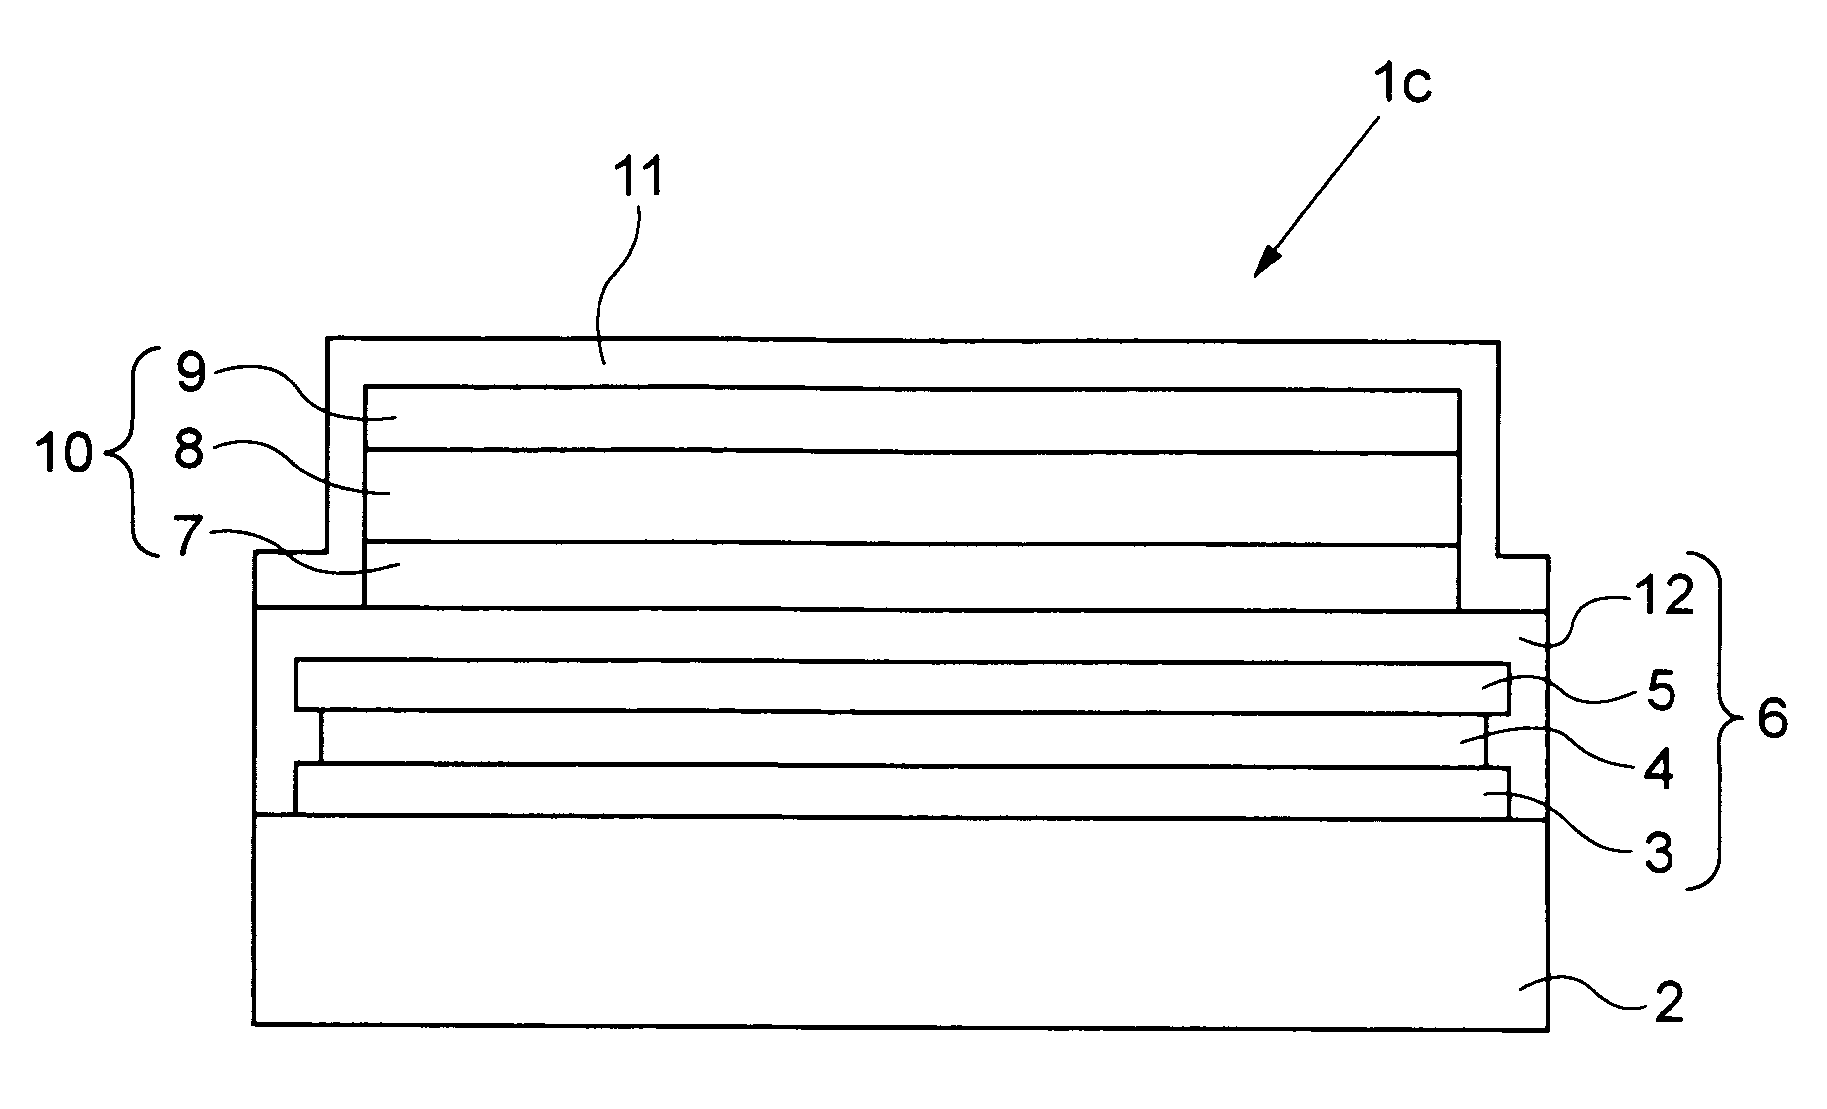 Organic electroluminescence display panel including a gas barrier laminate between a substrate and an organic electroluminescence element